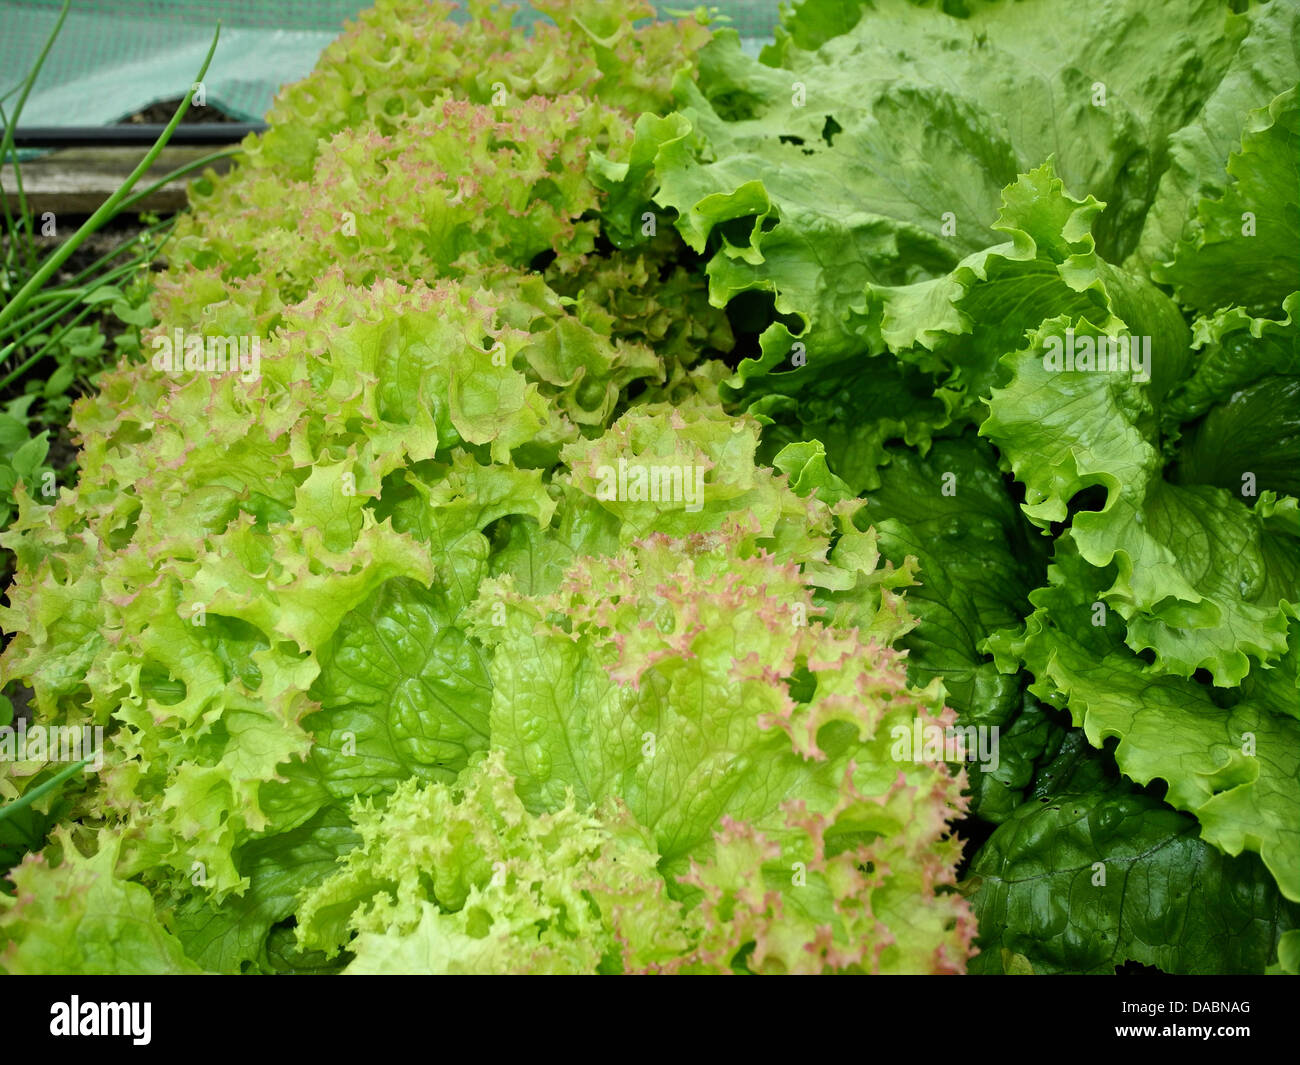 Colourful colorful salad leaf lettuce growing in a garden Stock Photo